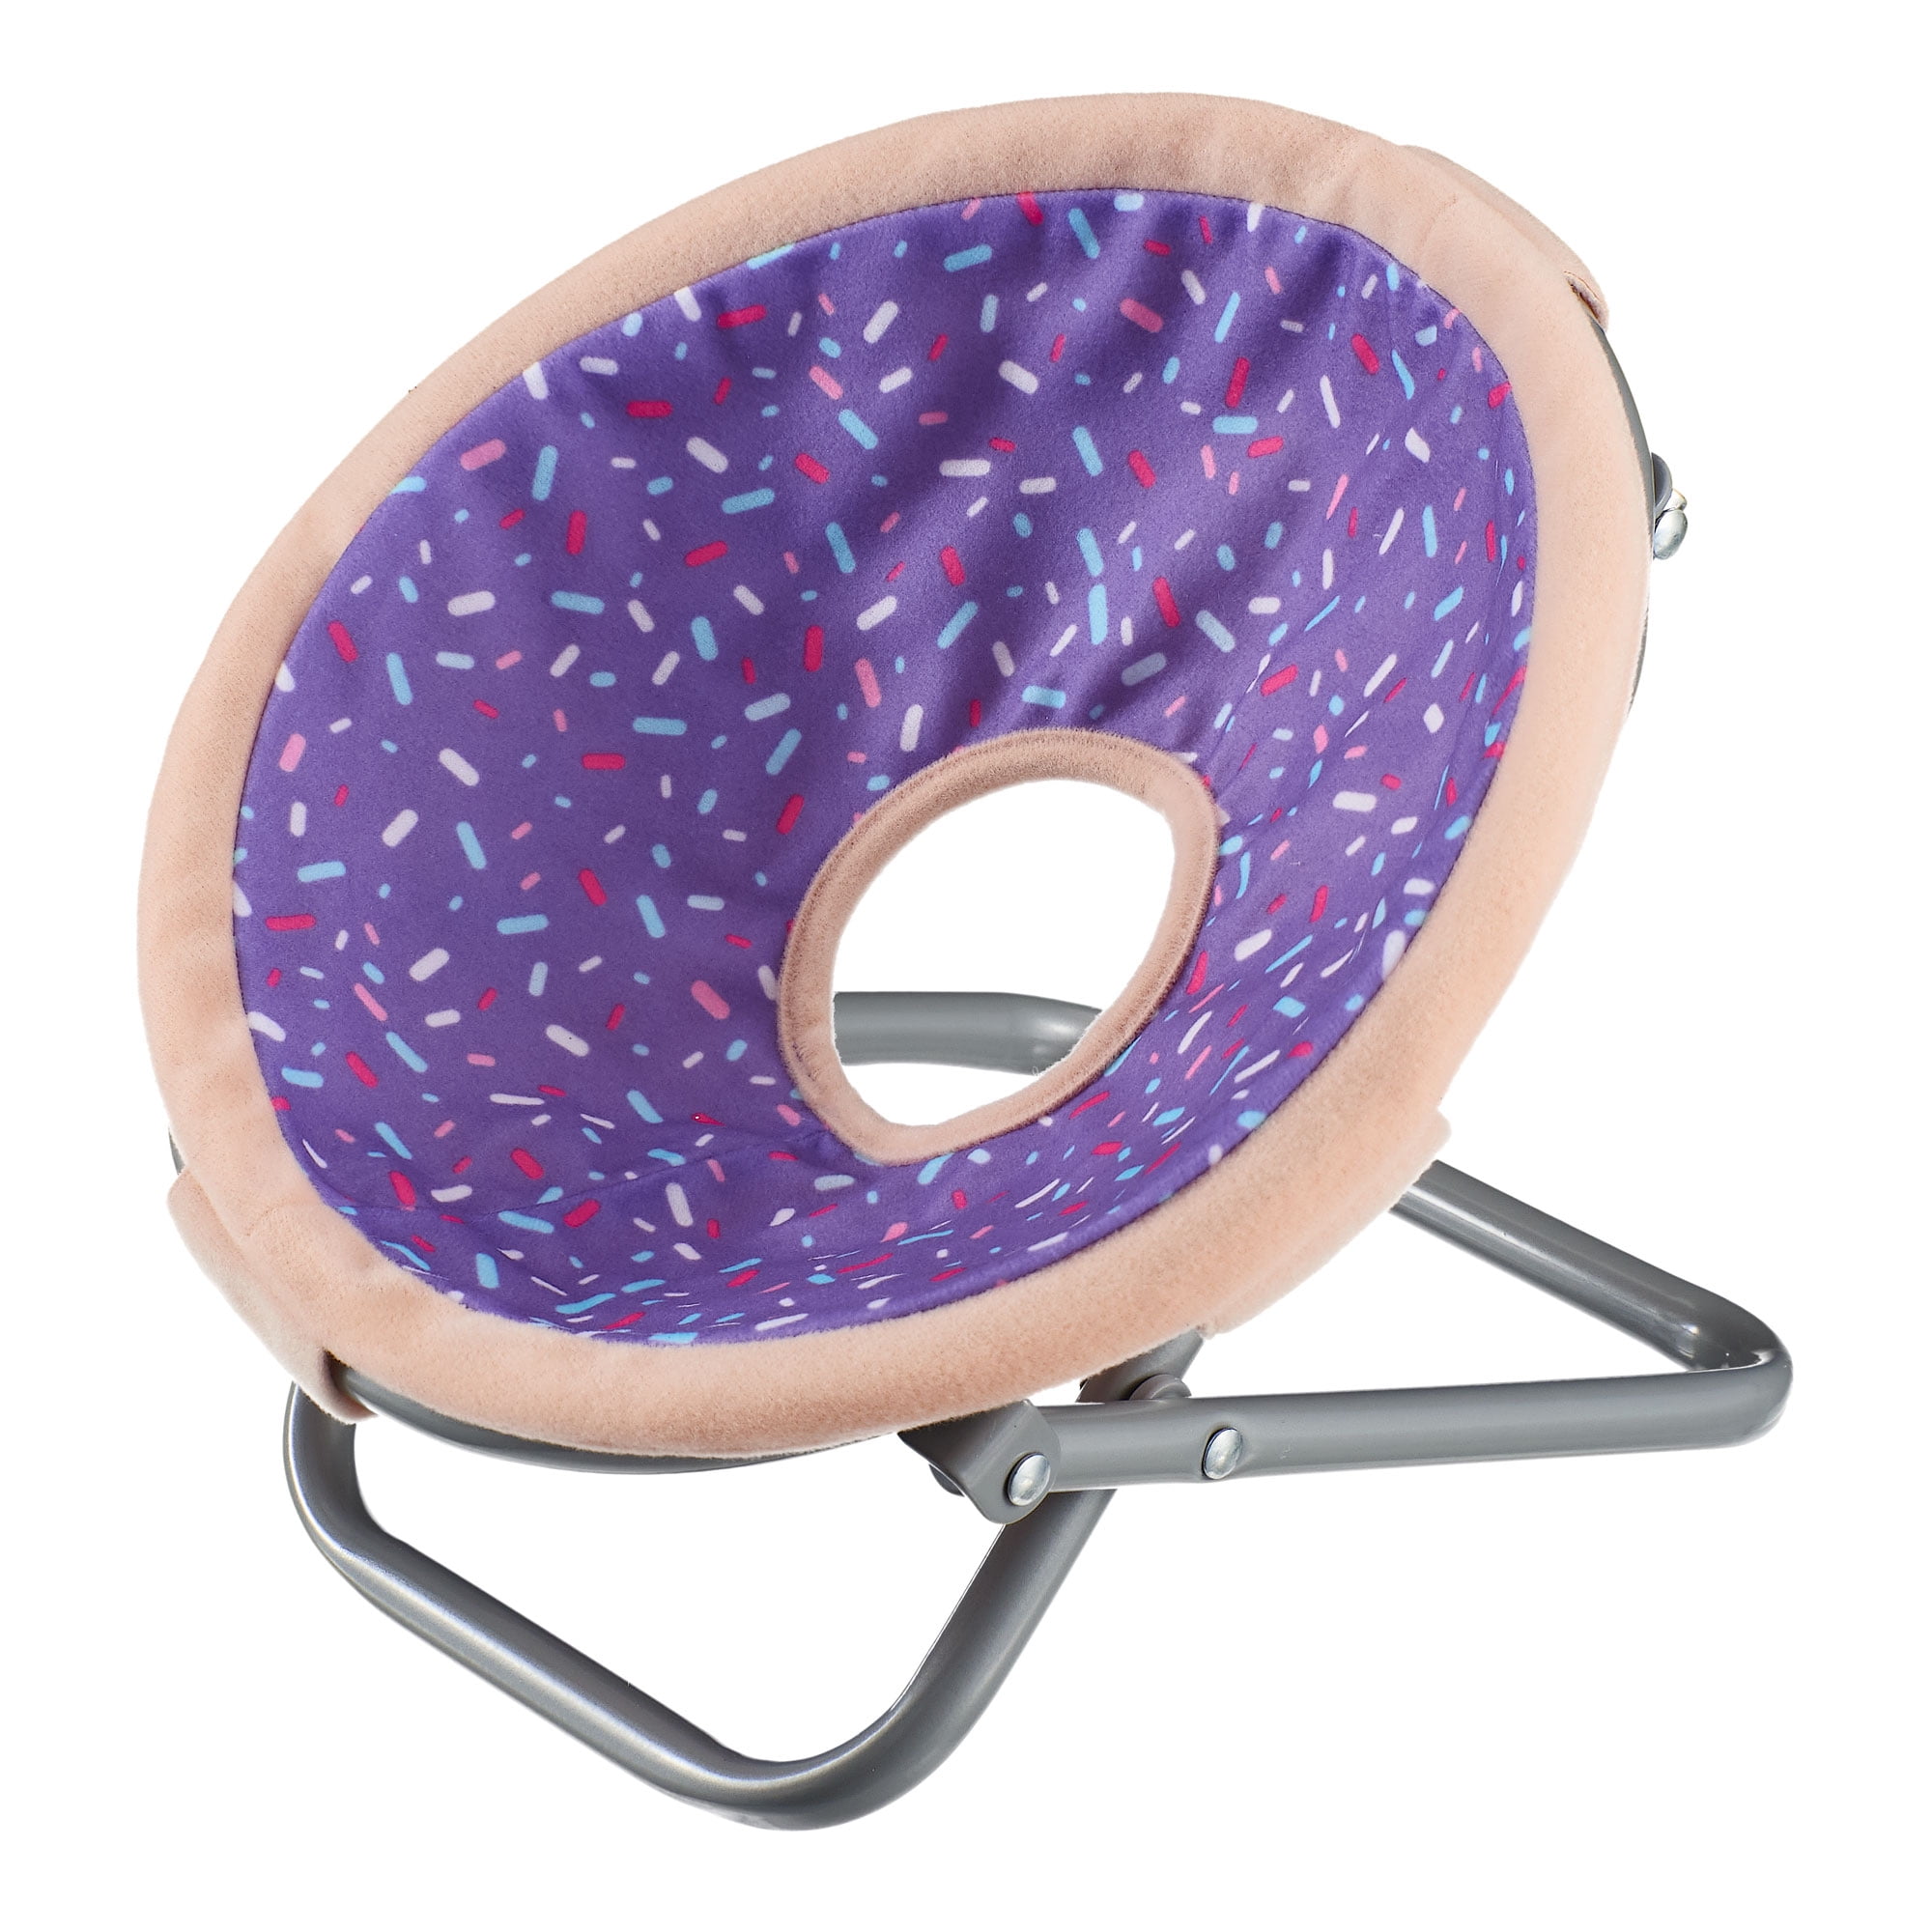 My Life As A Donut Saucer Chair for 18 Dolls (Doll not Included)